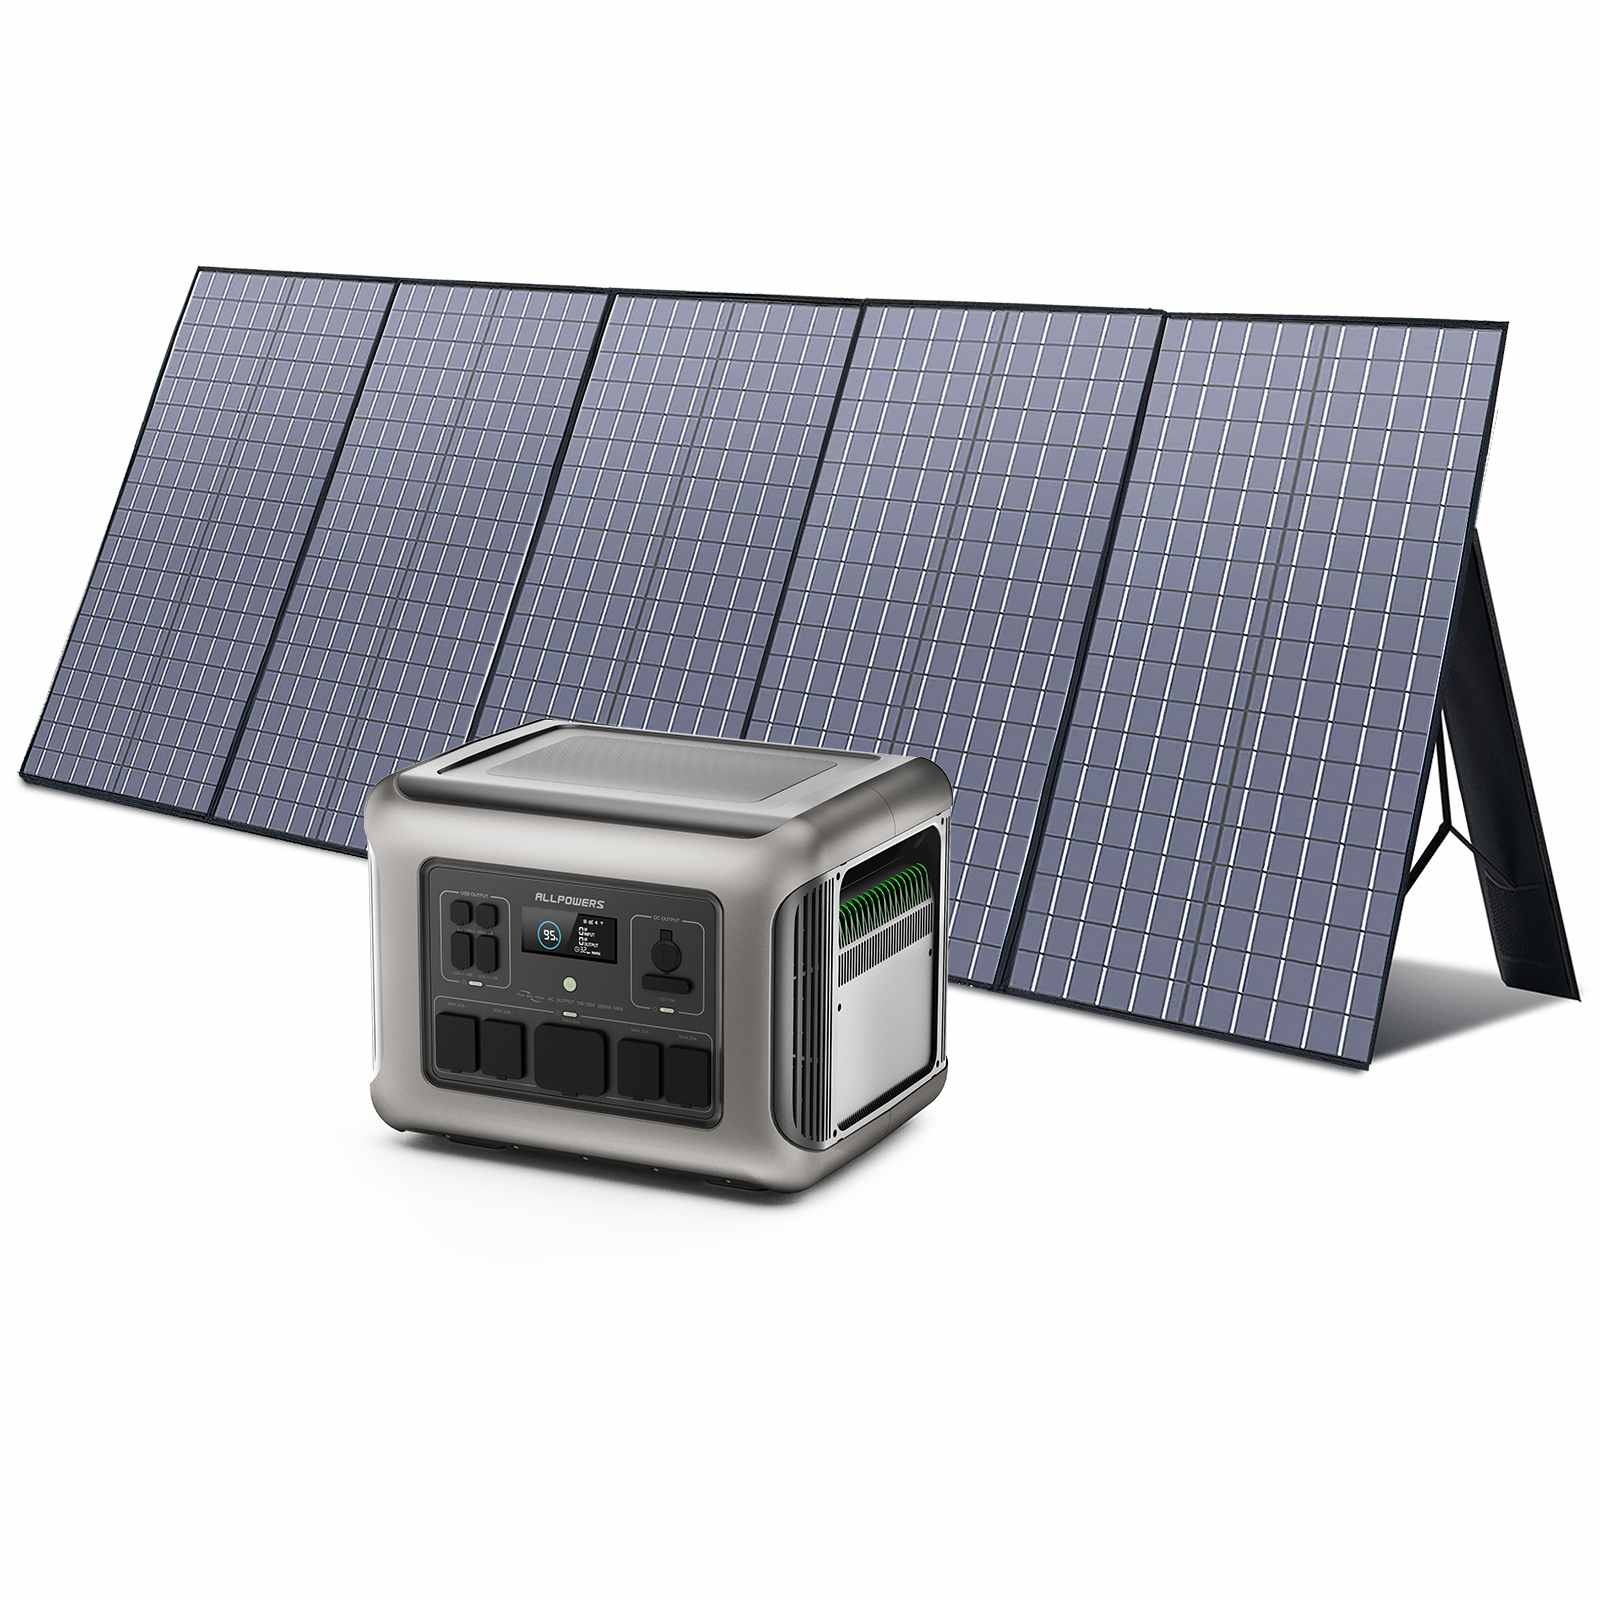 ALLPOWERS R2500 Portable Home Backup Power Station 2500W 2016W (R2500 + SP039 600W Solar Panel)